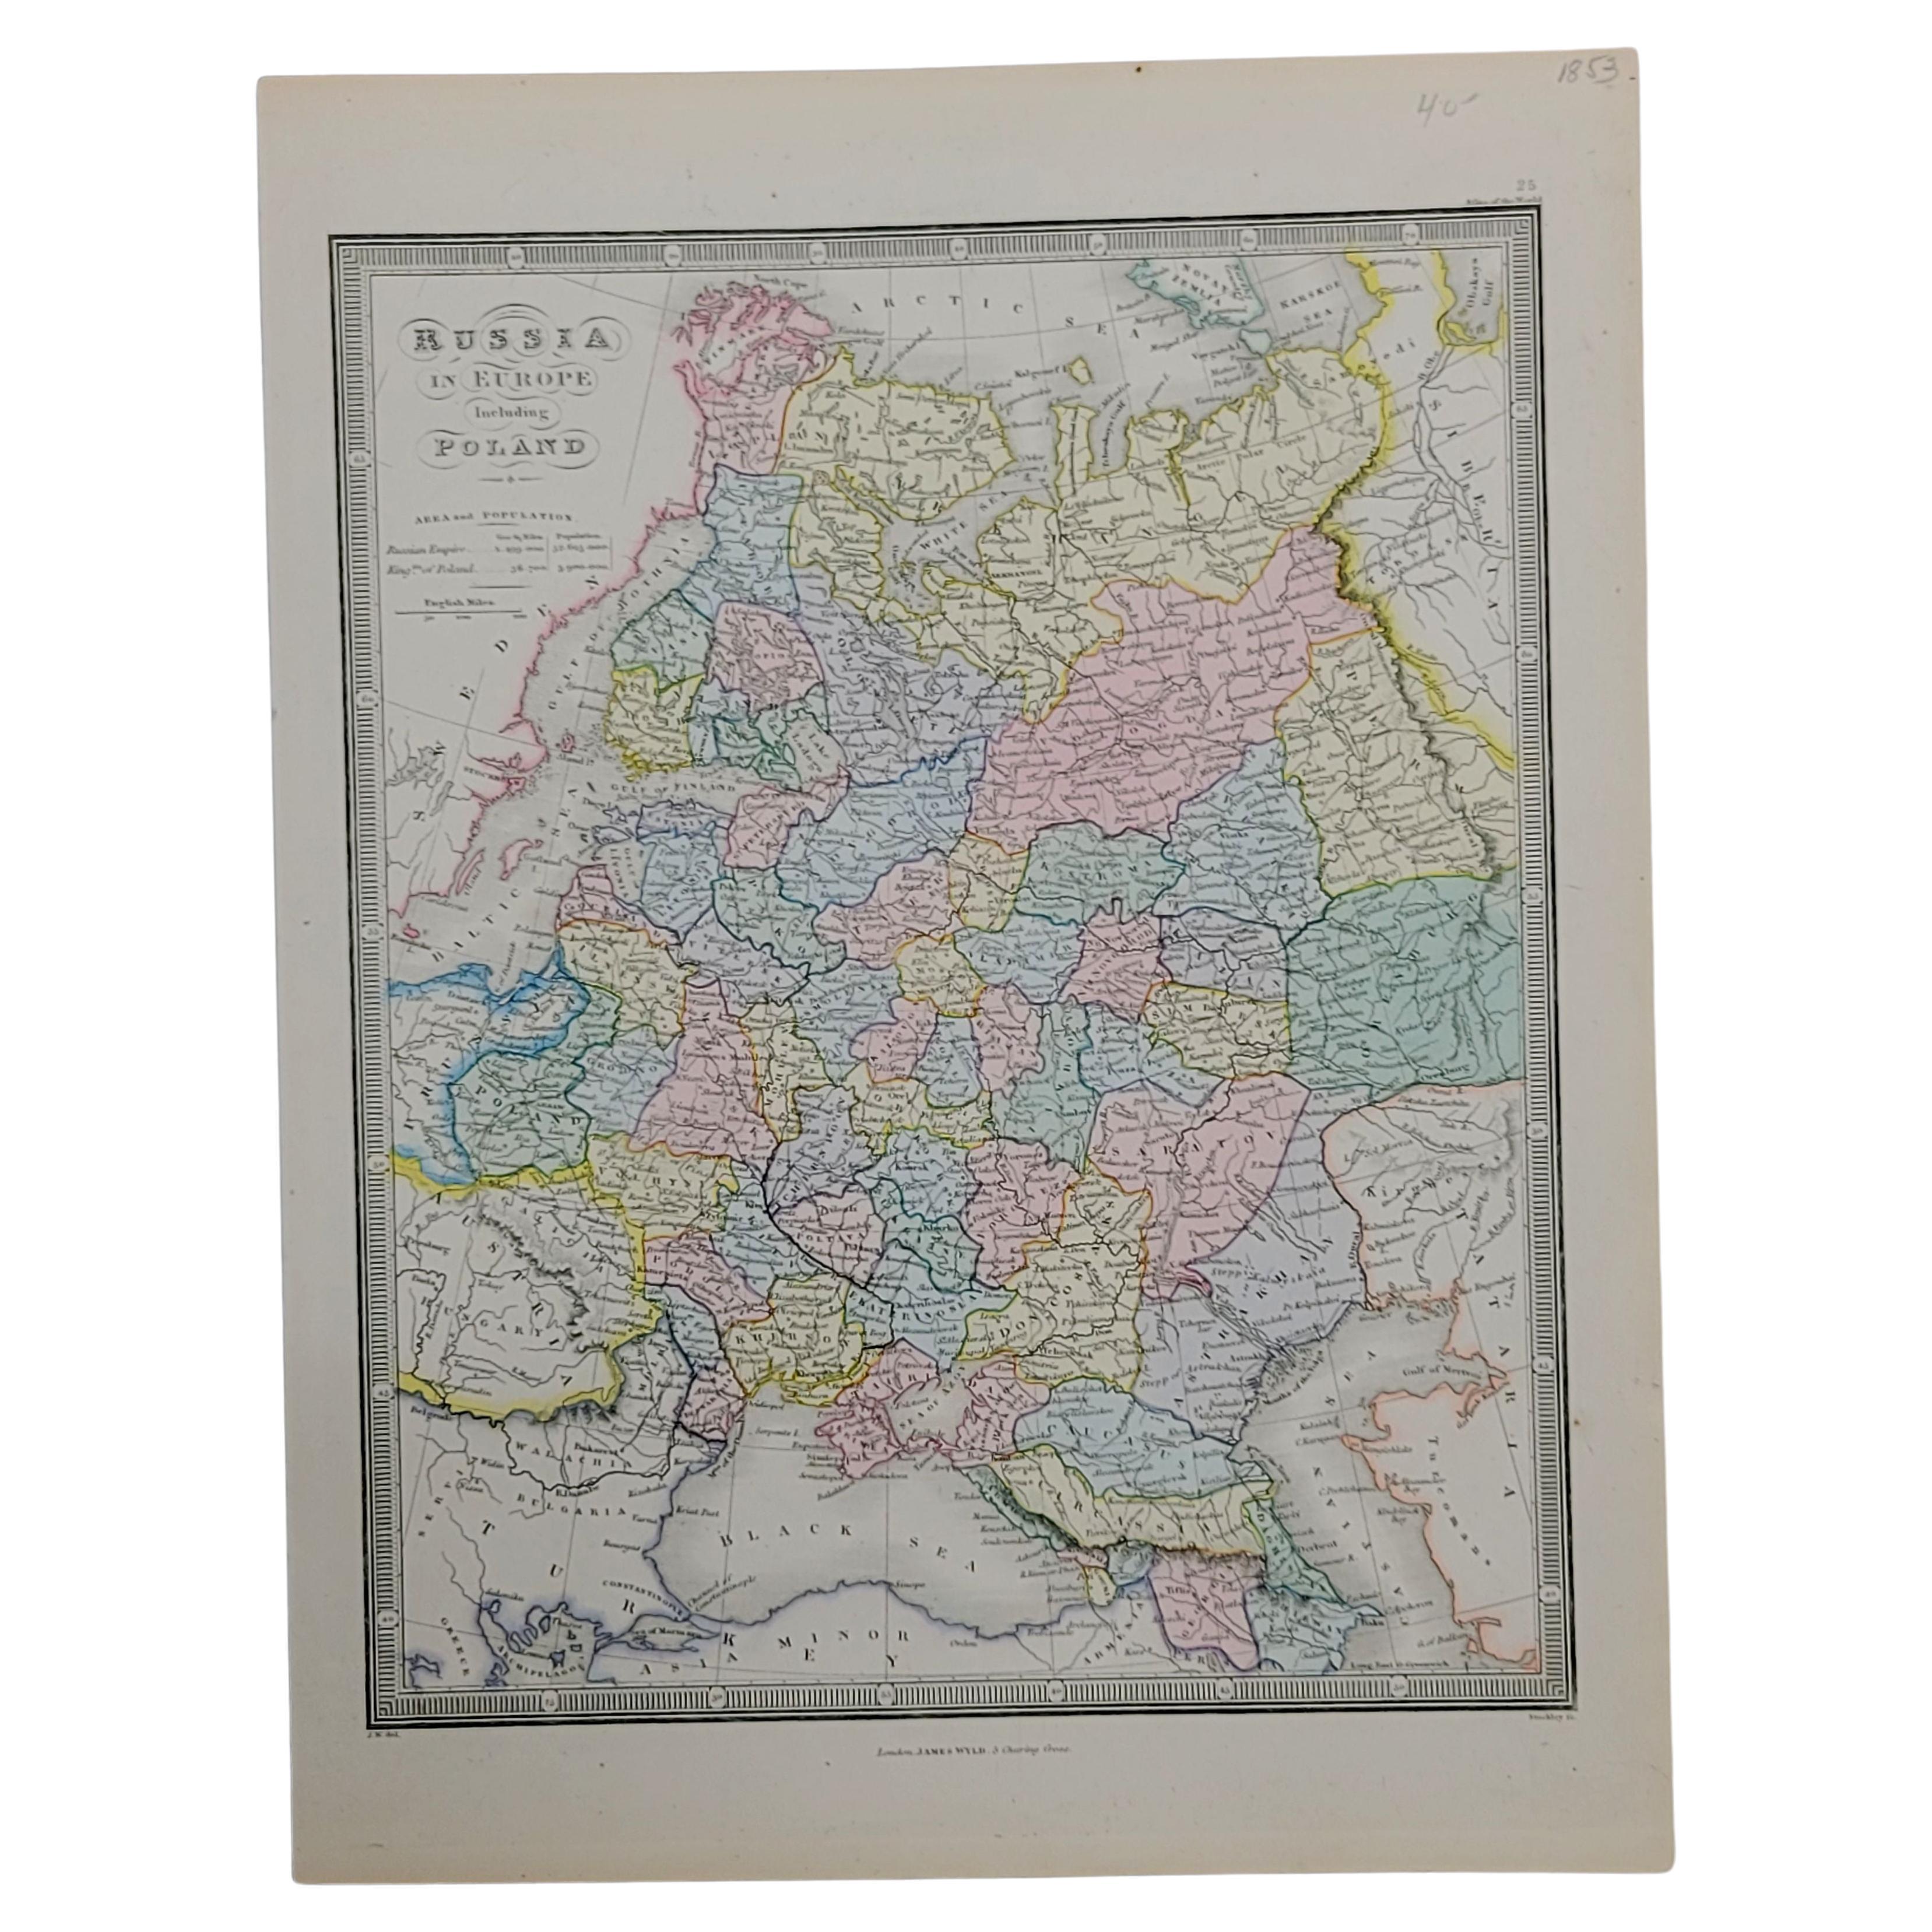 1853 Map of "Russia in Europe Including Poland" Ric.r016